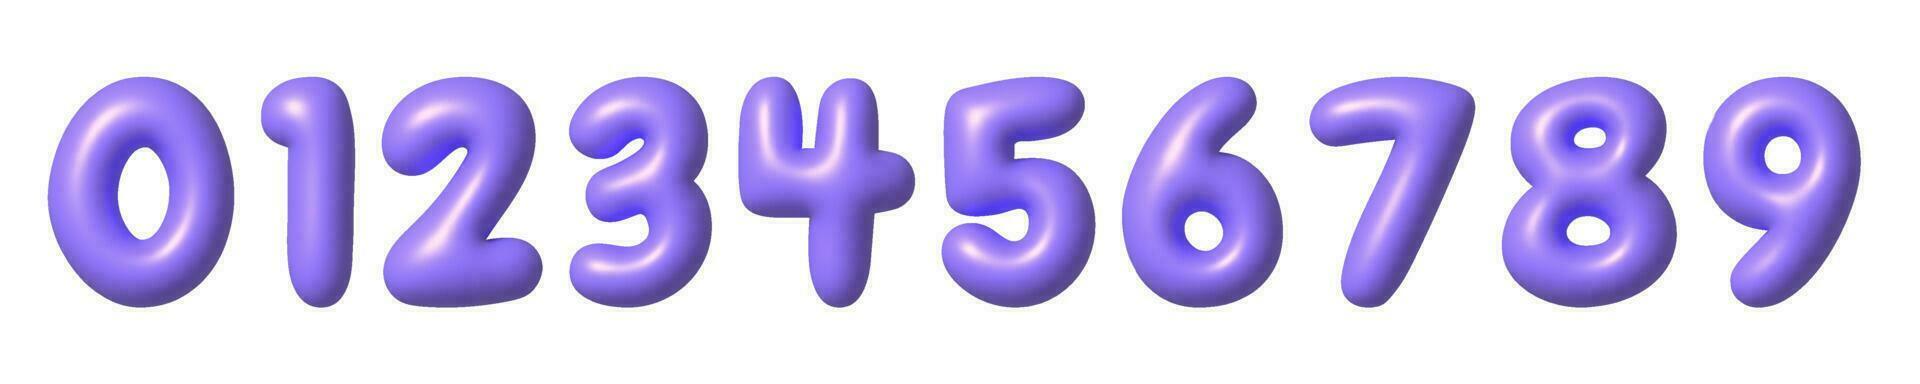 Set of purple 3D numbers icons. Cute metallic cartoon math font with shiny bright highlights. 3d realistic vector design element.